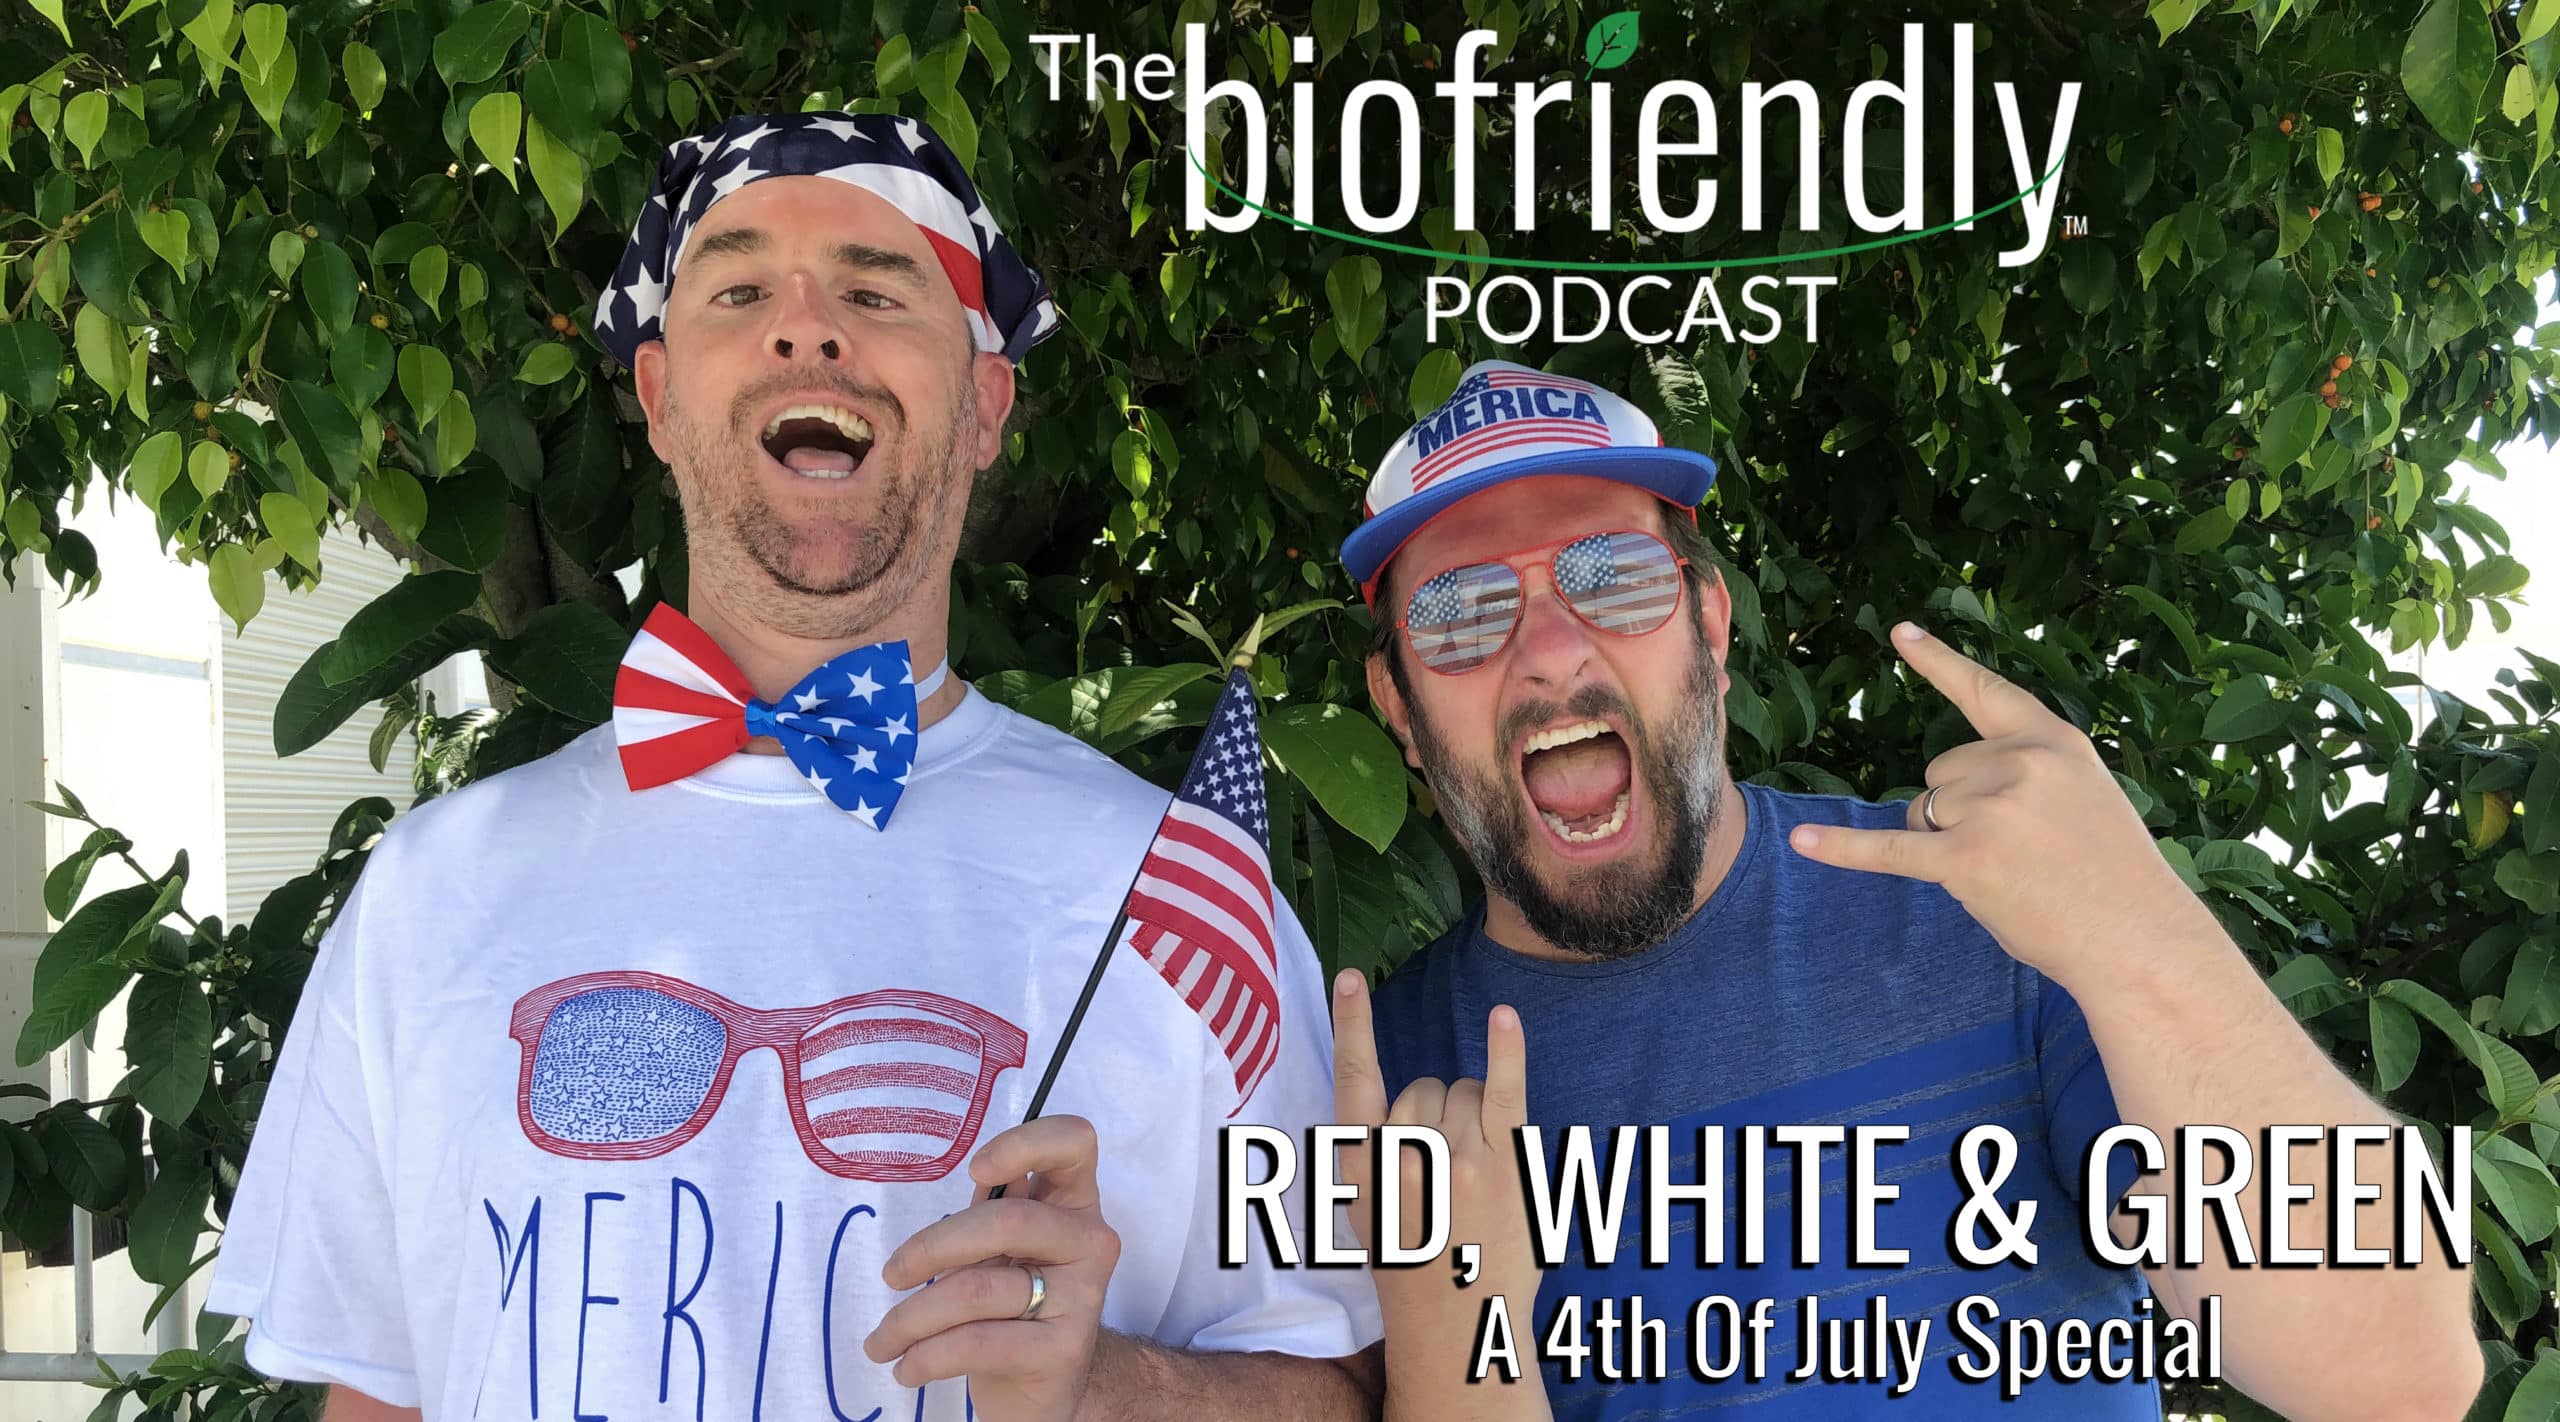 The Biofriendly Podcast - Episode 21 - Red, White & Green